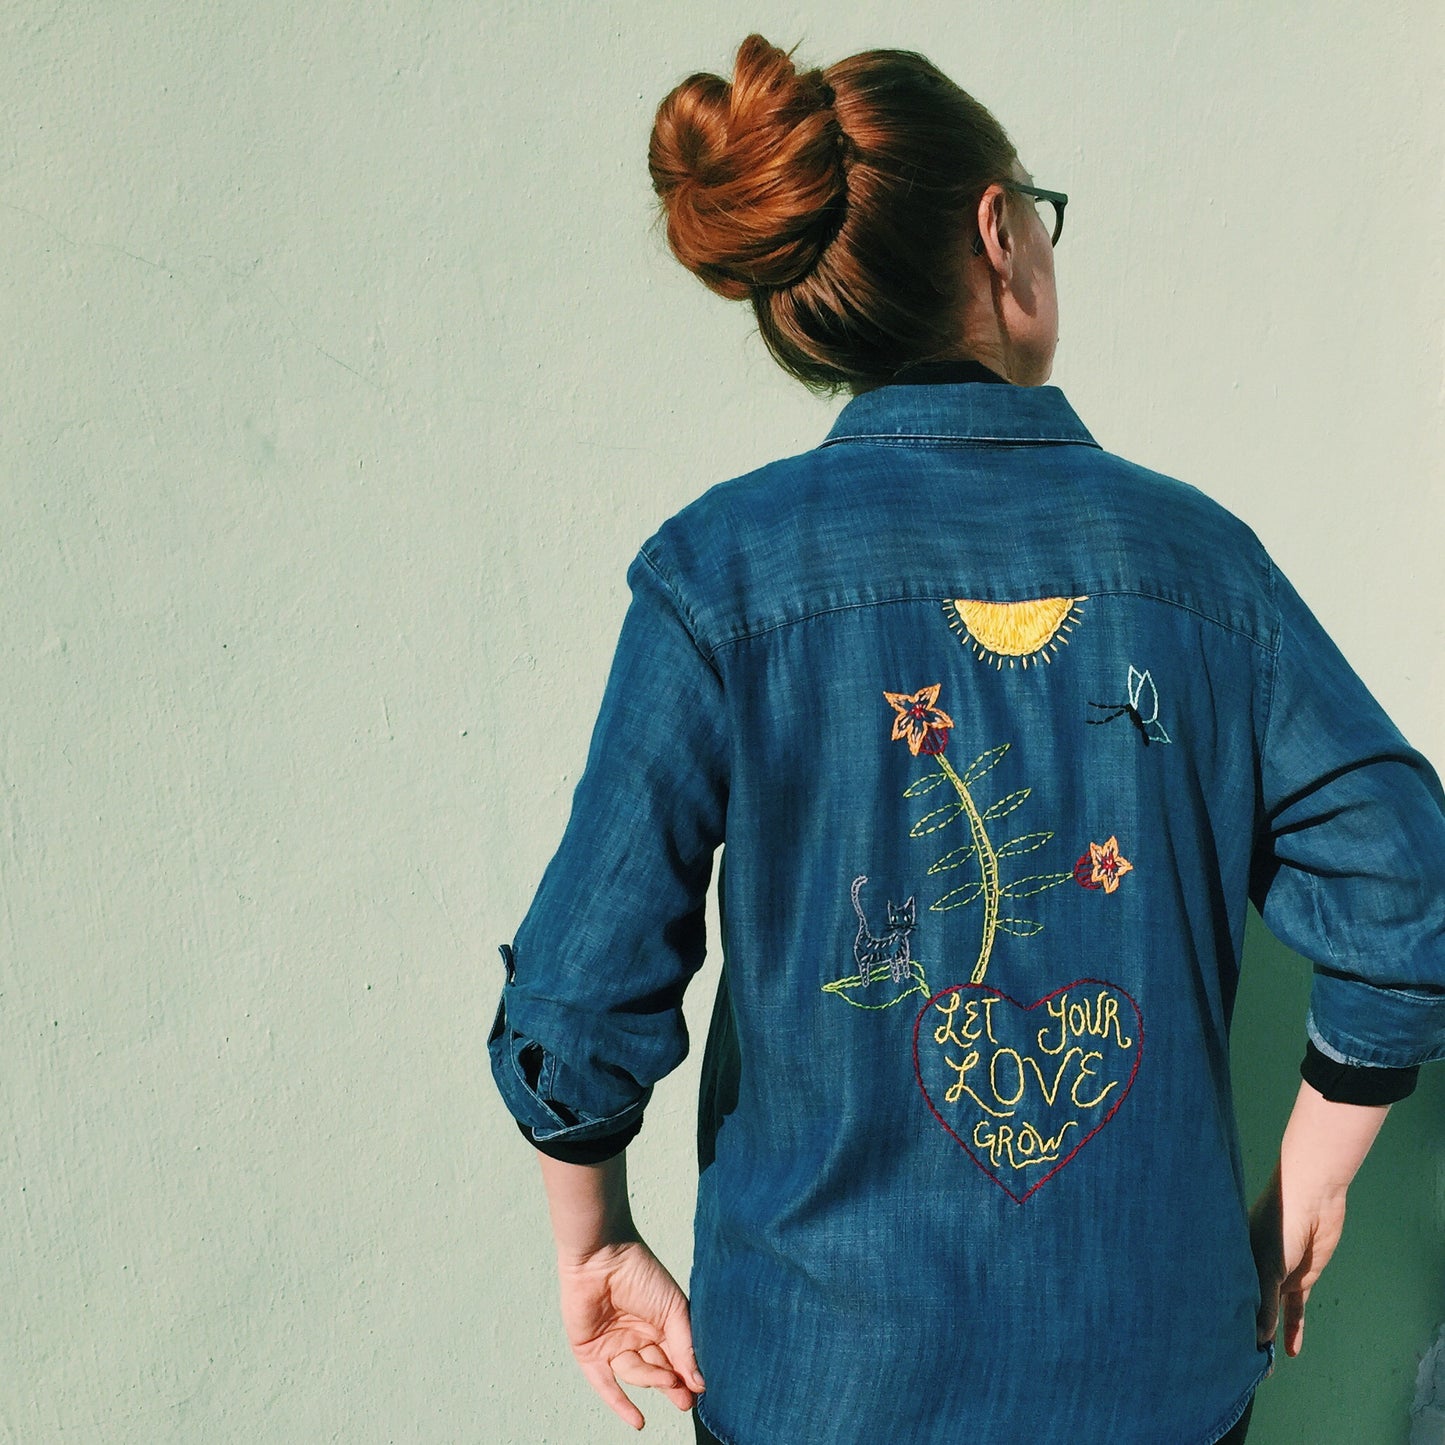 LET YOUR LOVE GROW Hand-Embroidered Denim Shirt.